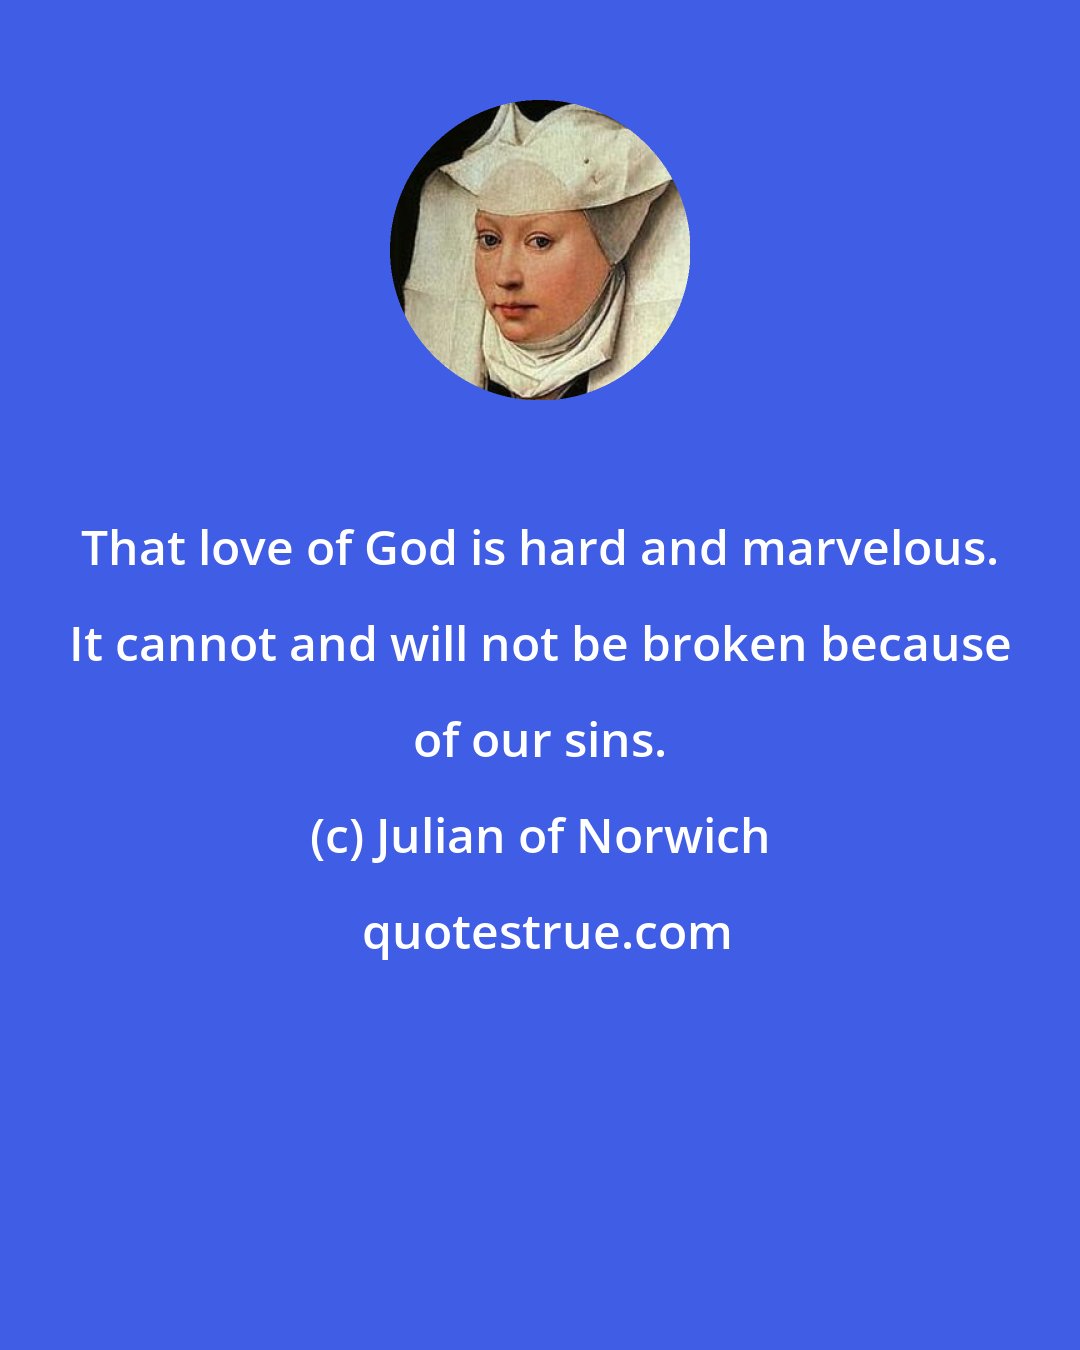 Julian of Norwich: That love of God is hard and marvelous. It cannot and will not be broken because of our sins.